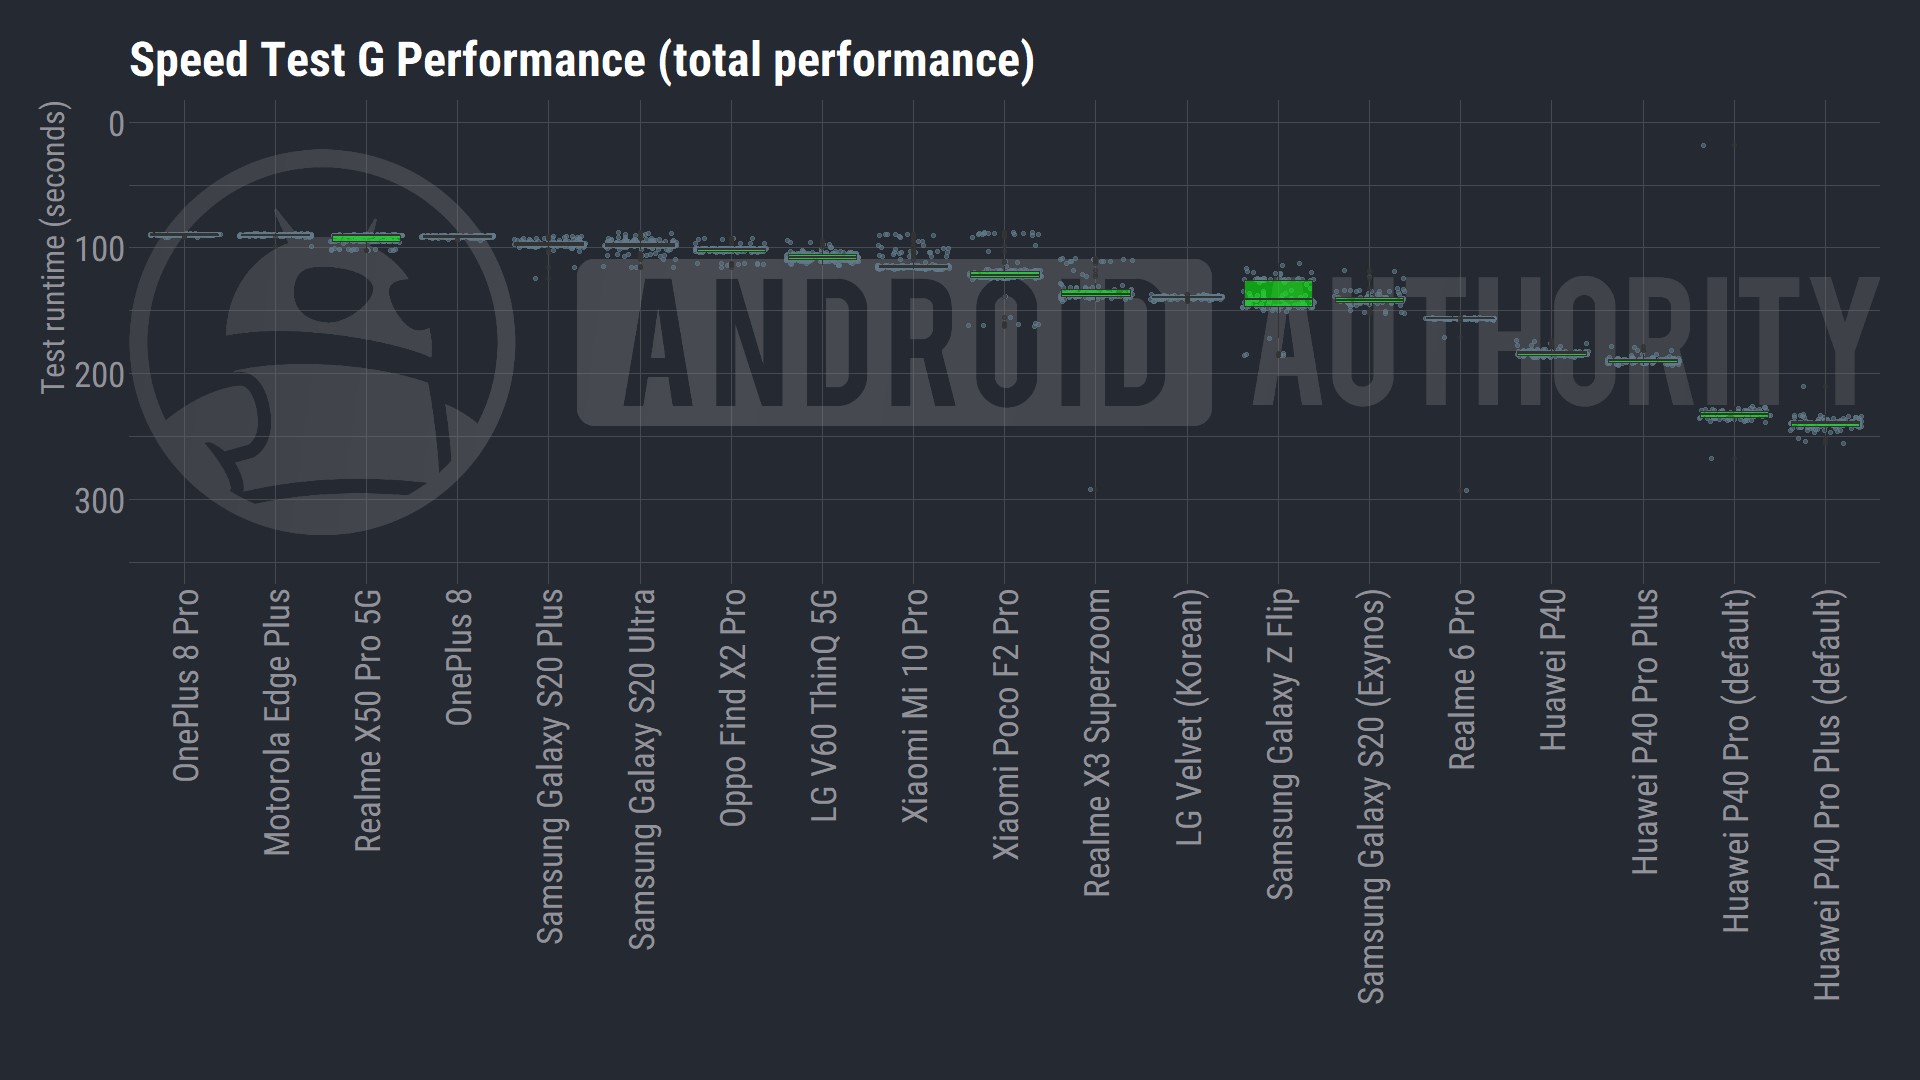 Best of Android mid 2020 performance Speed Test G total performance